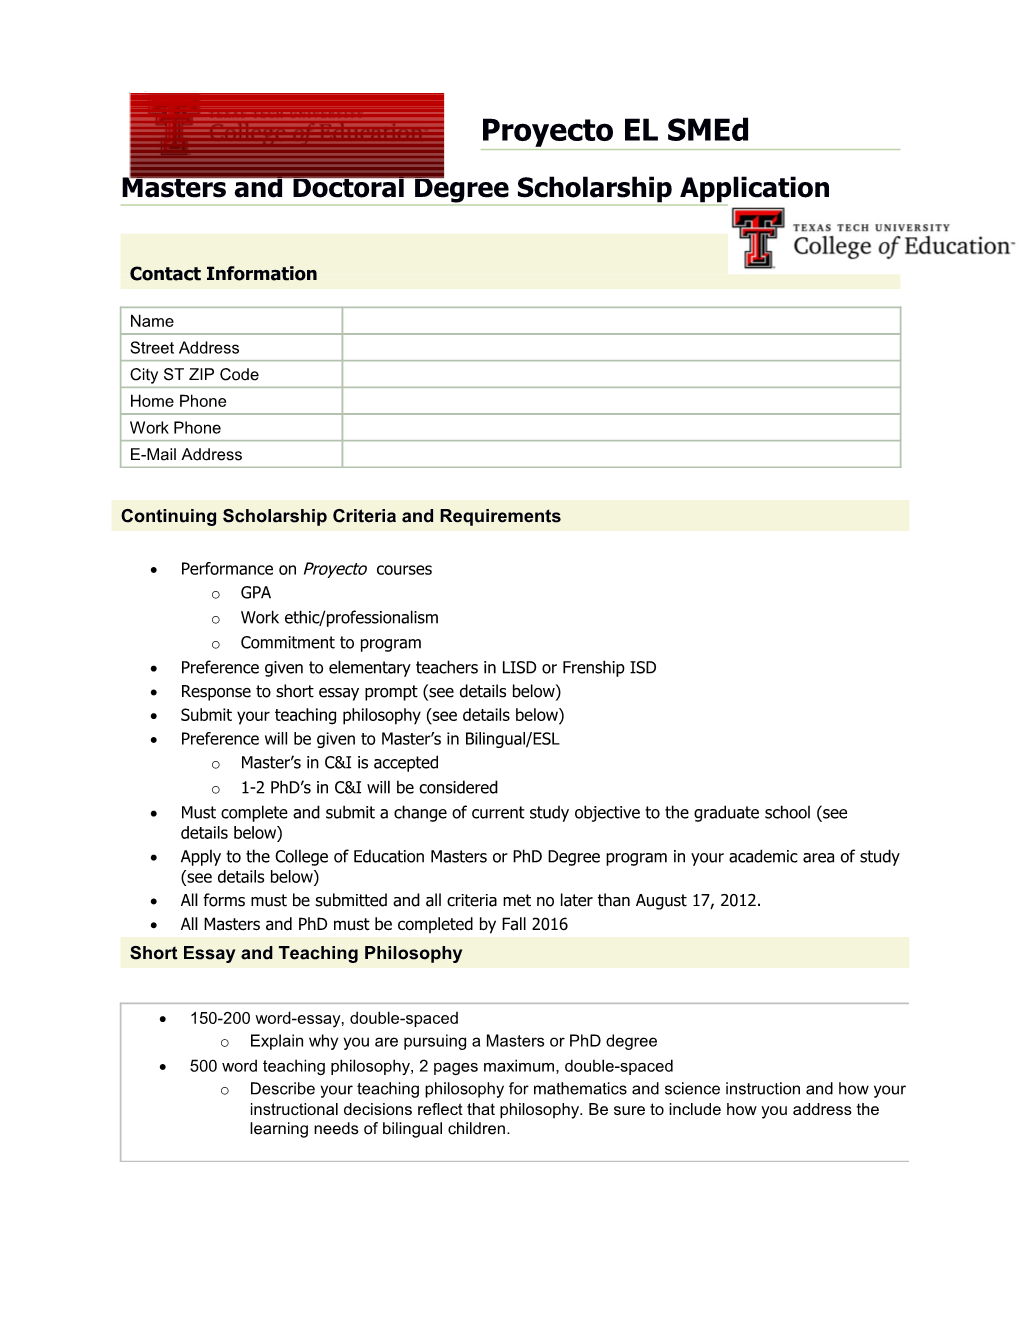 Masters and Doctoral Degree Scholarship Application